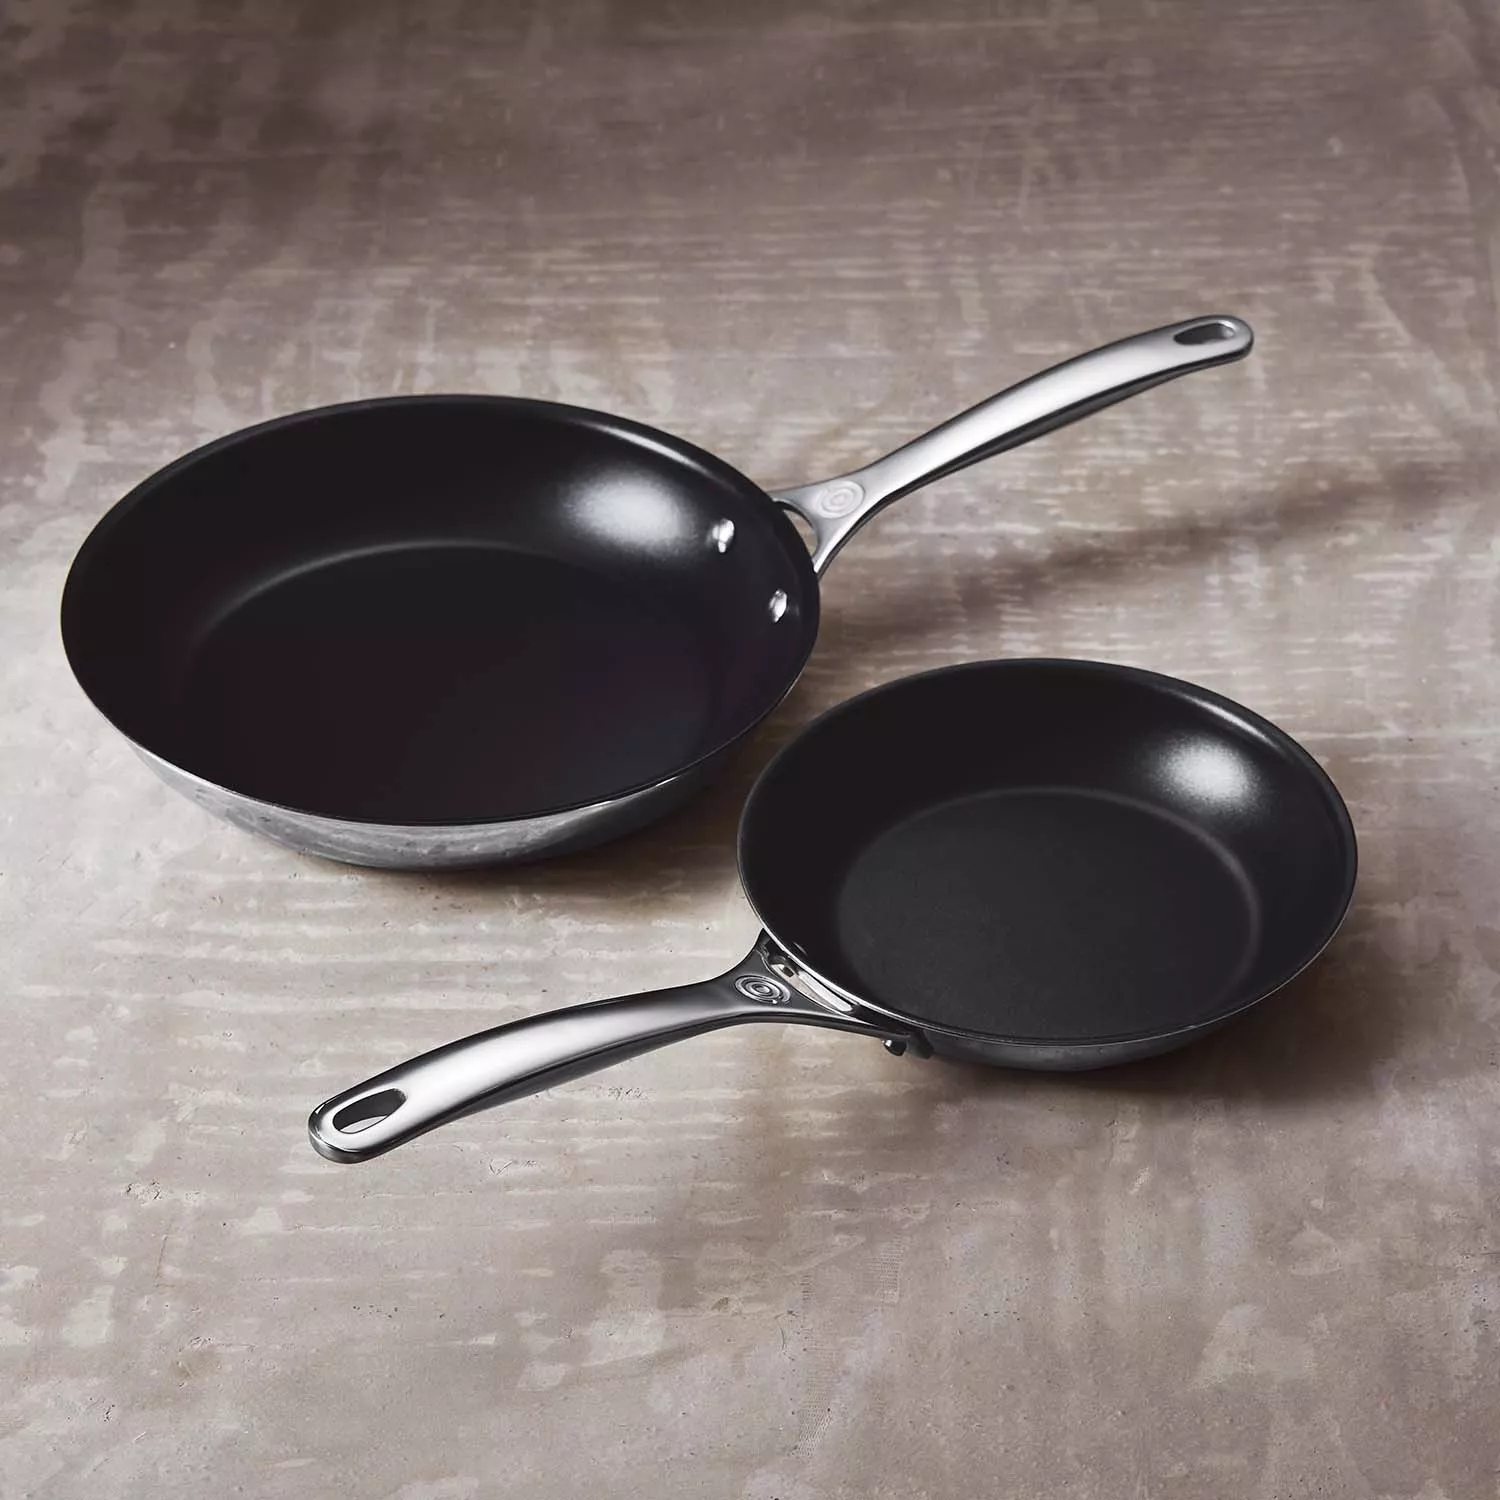 Le Creuset Signature 10 Stainless Steel Fry Pan + Reviews